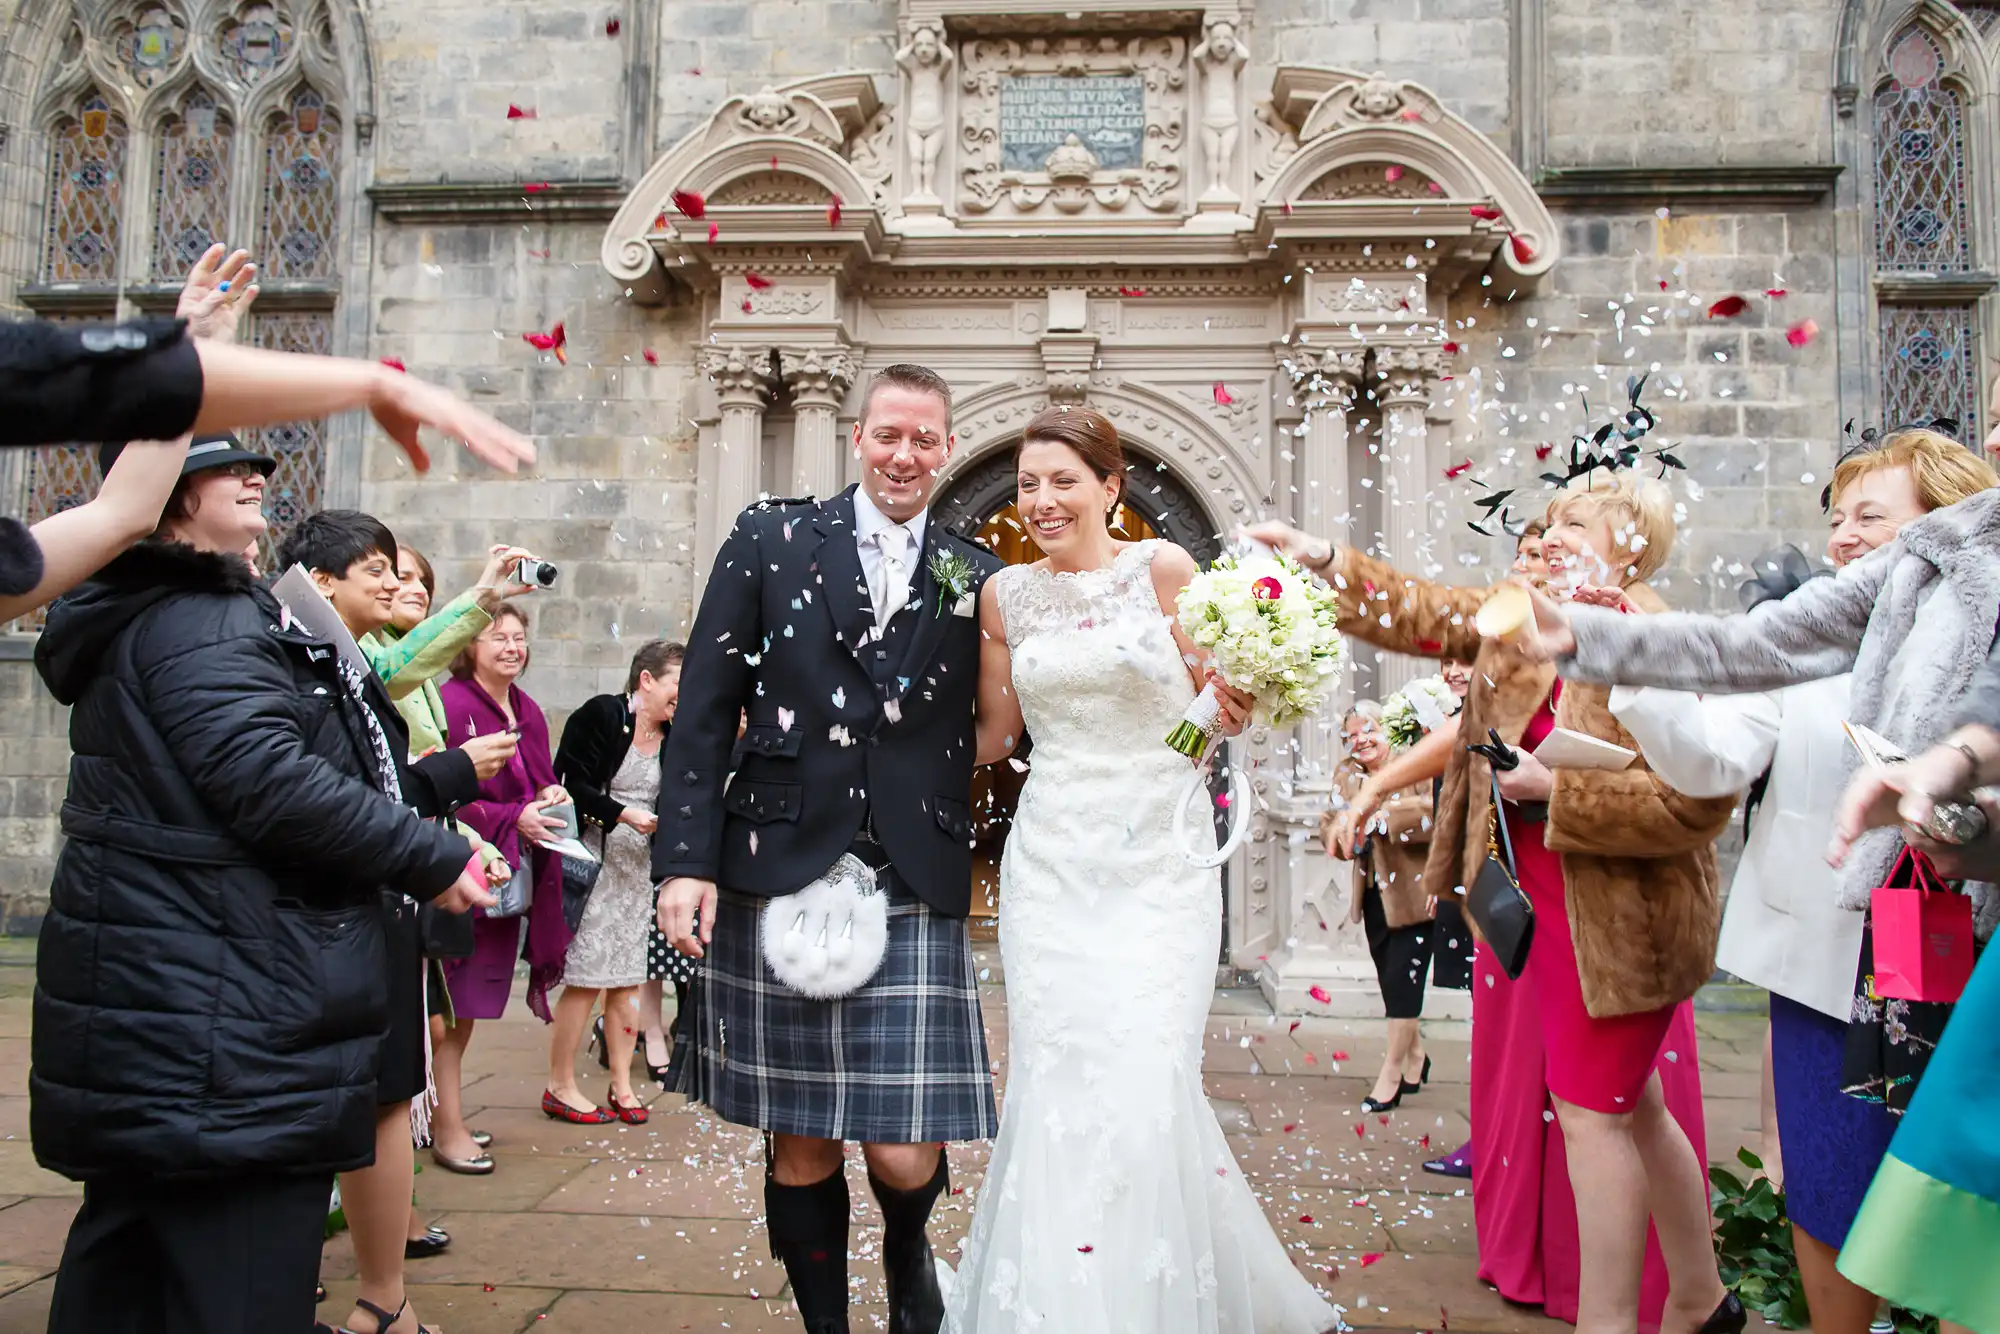 A bride and groom smile as they walk through a crowd throwing confetti outside a church, the groom in a kilt and the bride in a white gown.